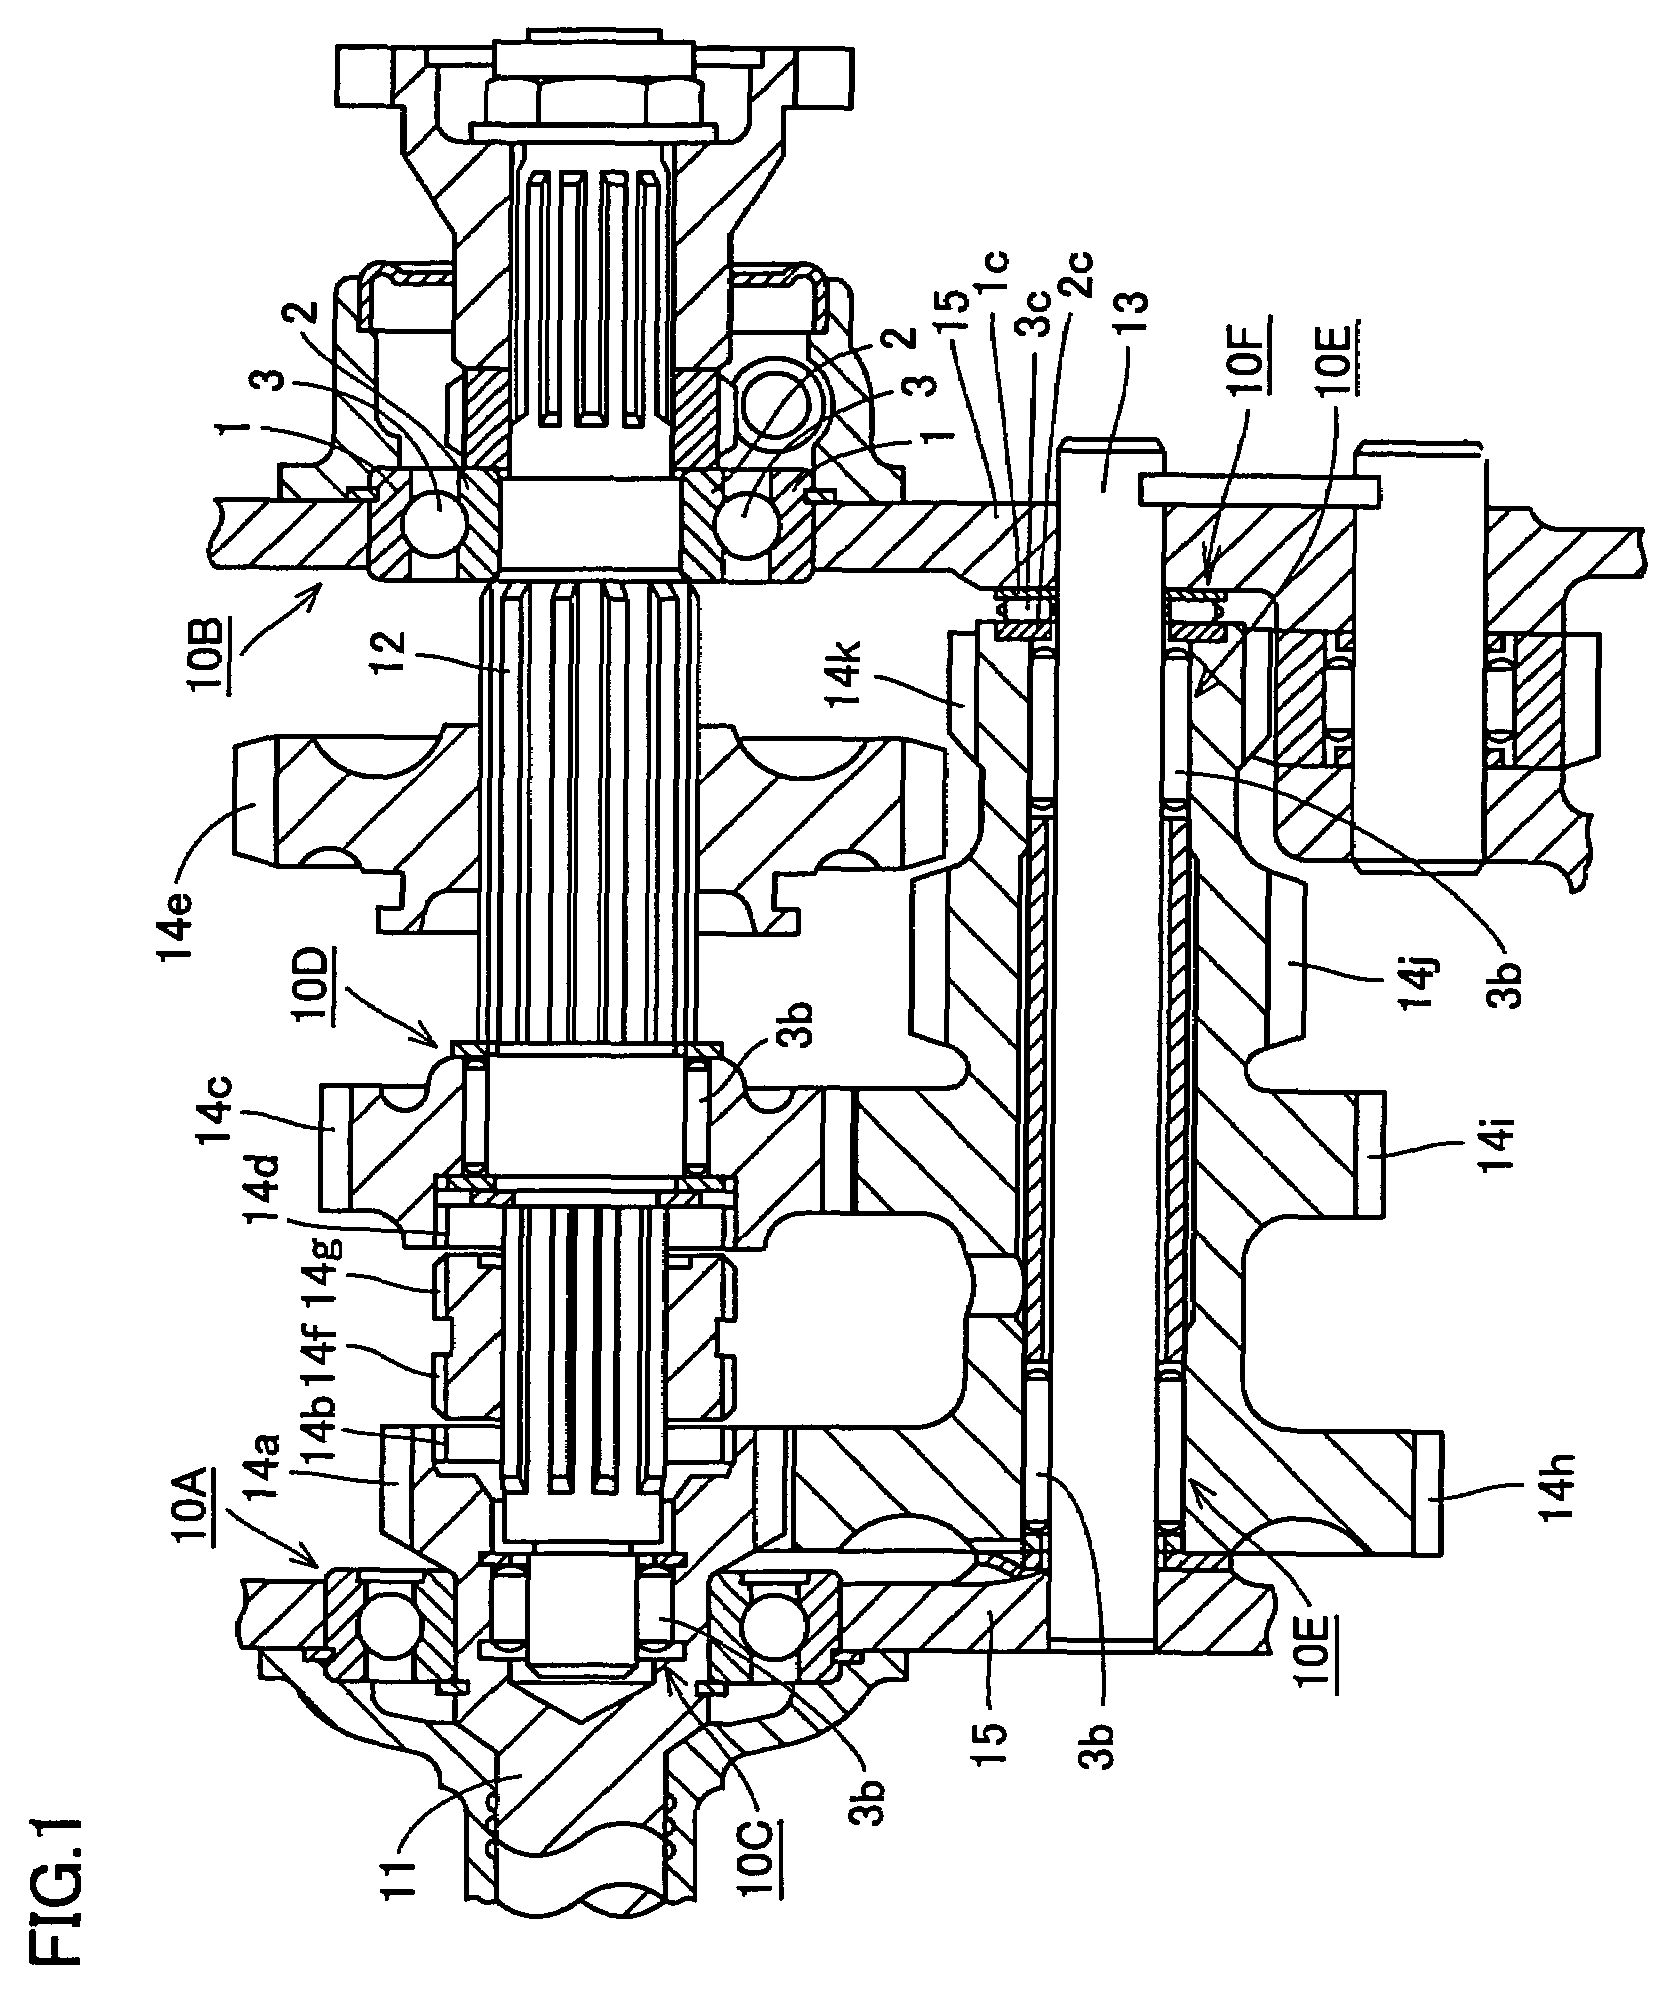 Transmission component, method of manufacturing the same, and tapered roller bearing